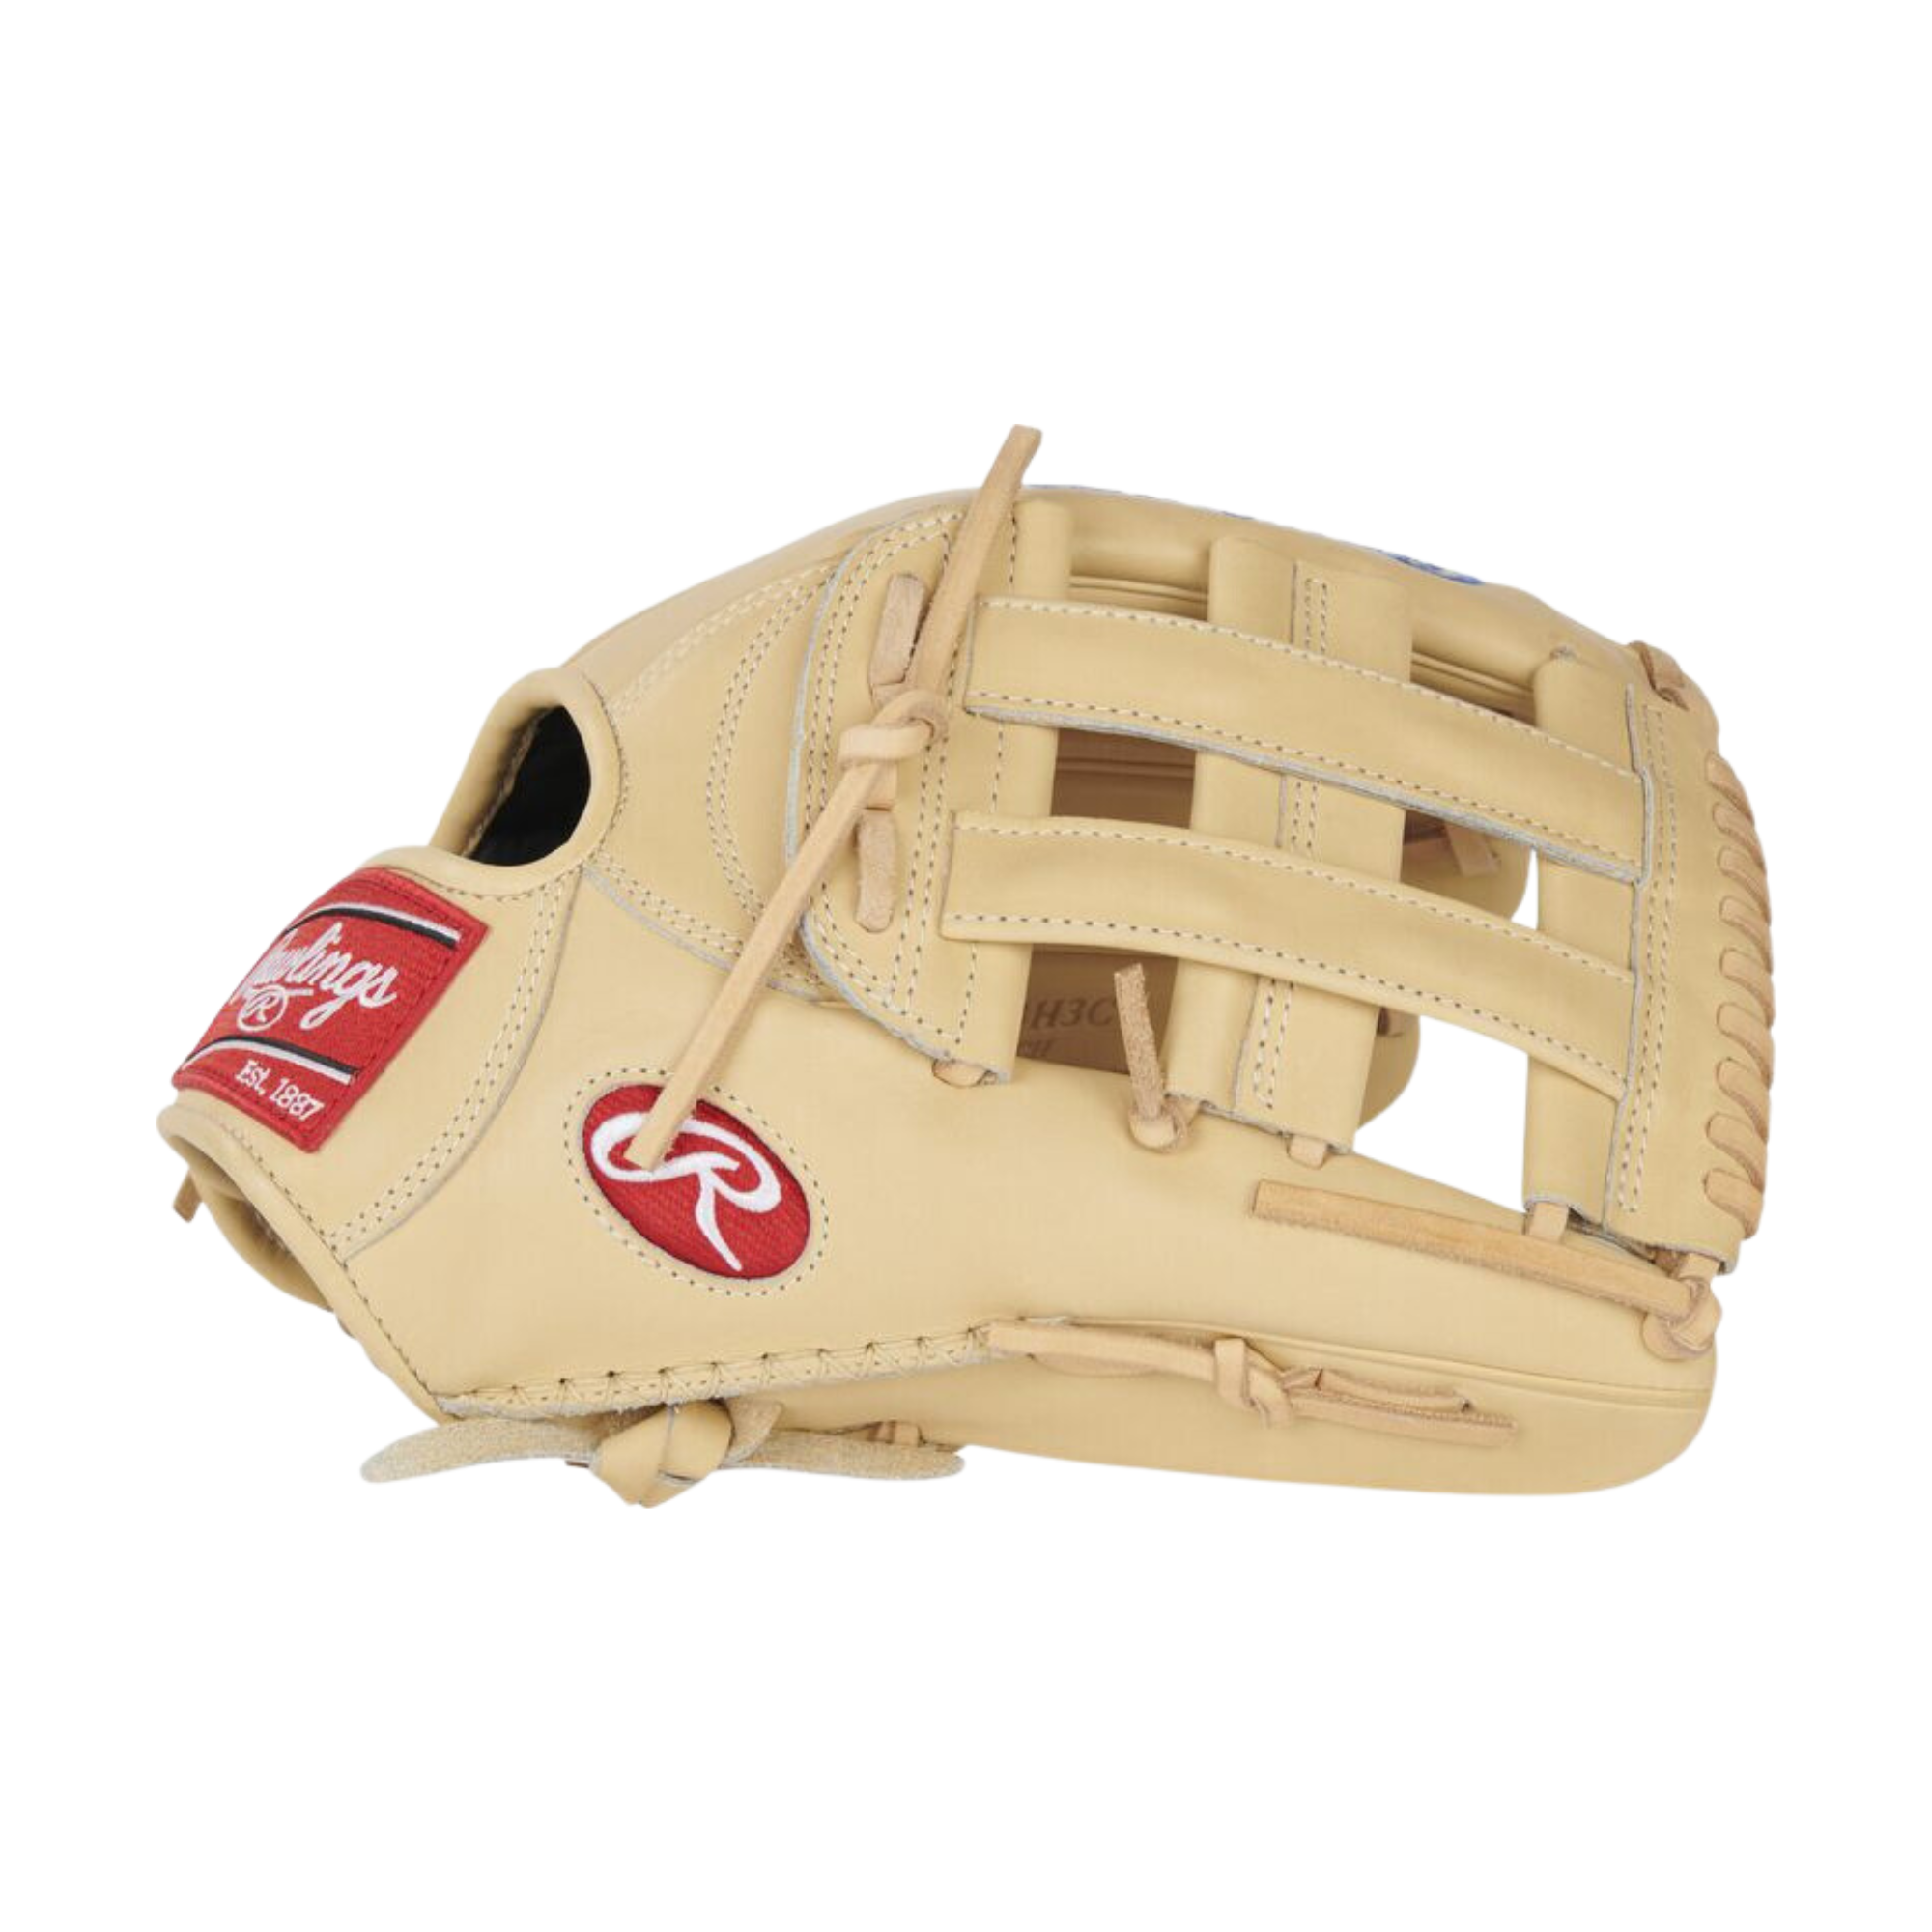 What Pros Wear: Bryce's Harper 4 Turf Trainer Now Available - What